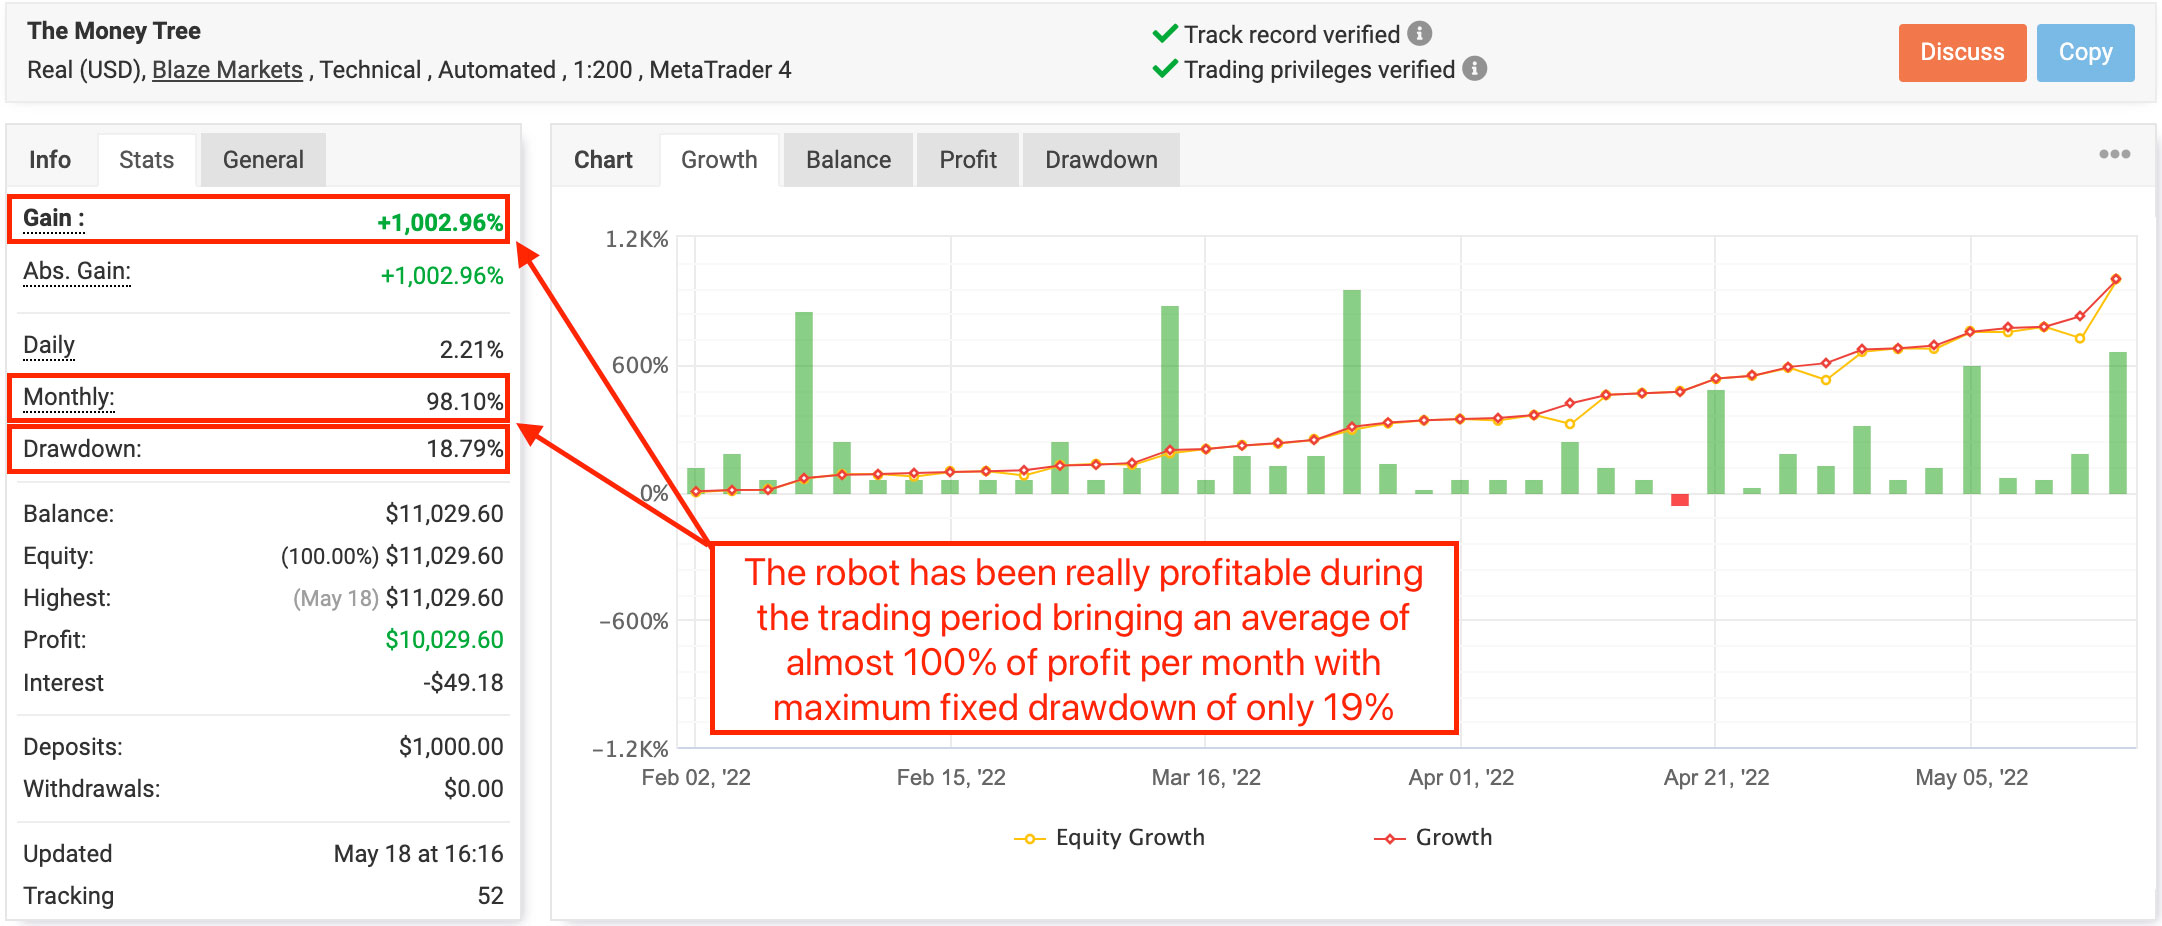 live trading on the account with real money for The Money Tree Robot 